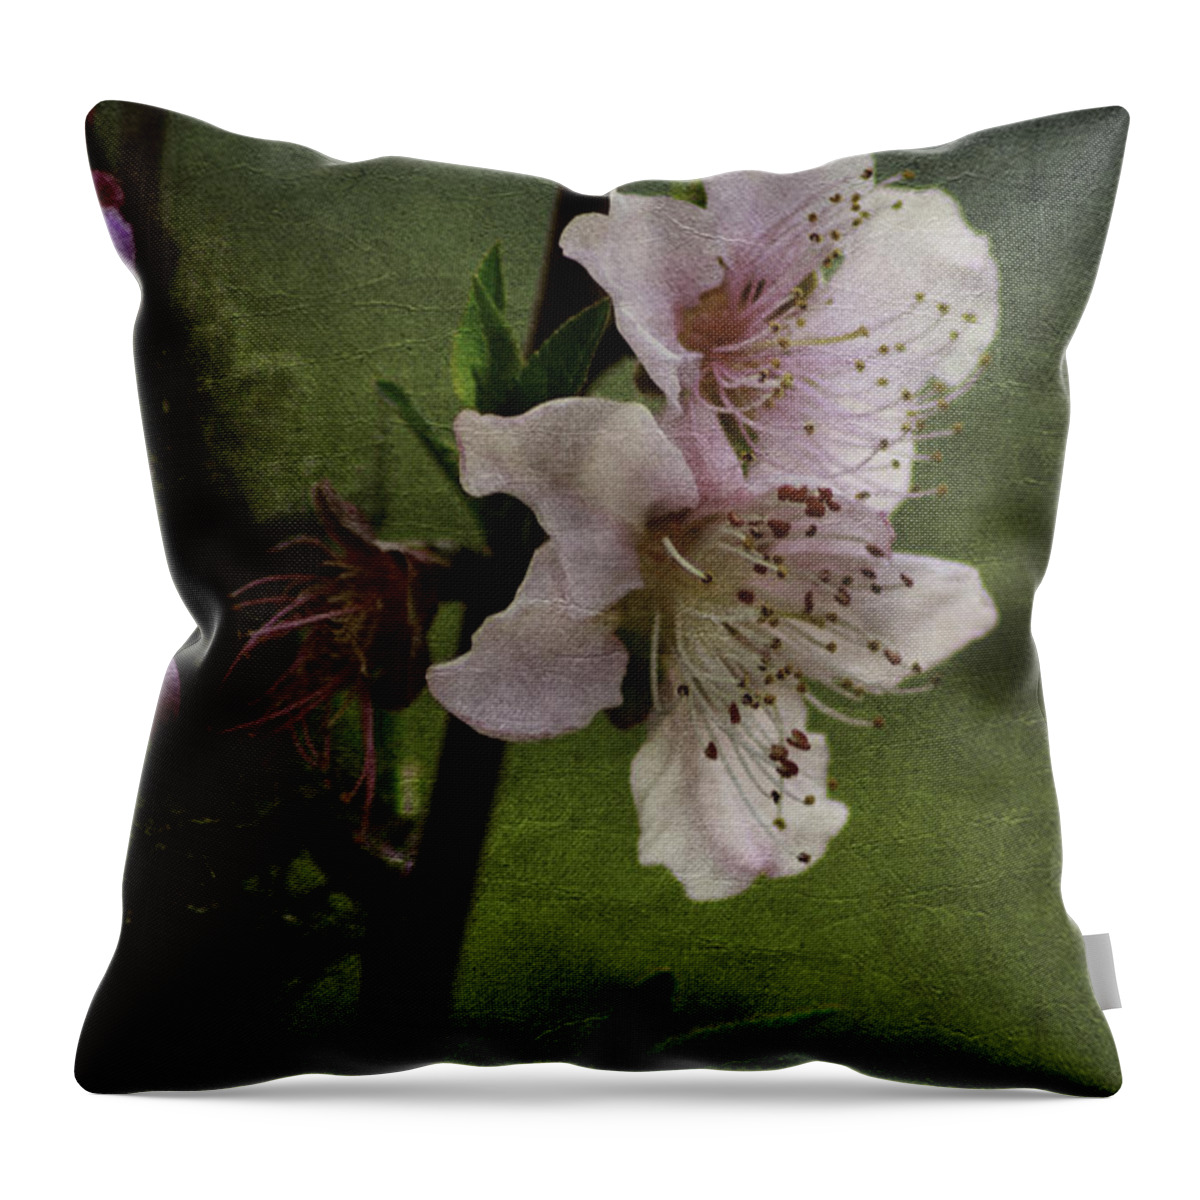 Flowers Throw Pillow featuring the photograph Into Spring by Lori Mellen-Pagliaro